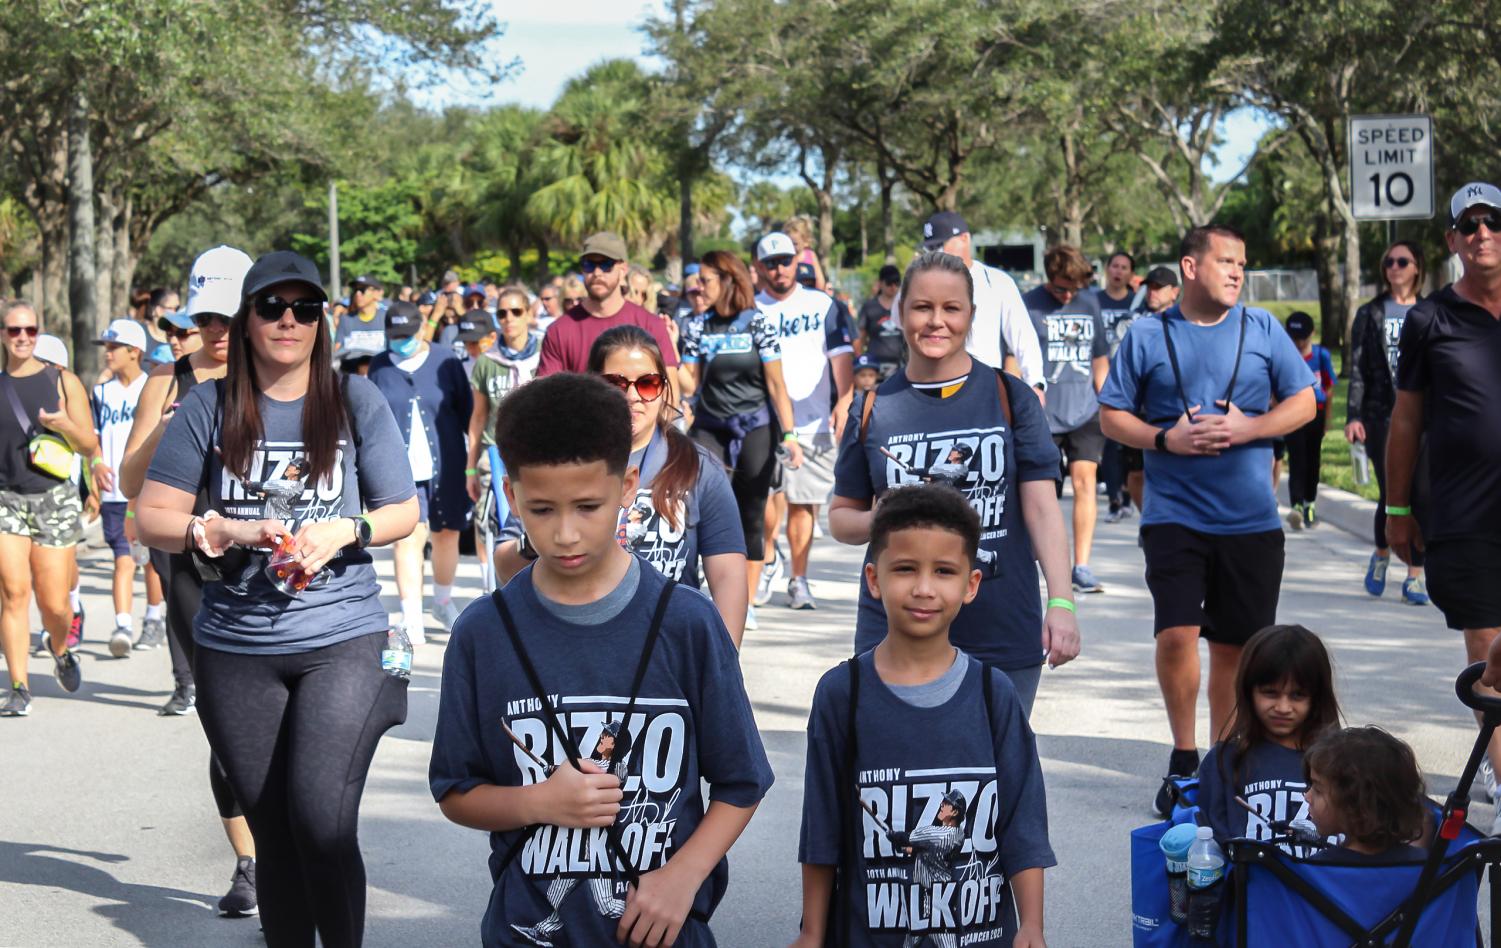 MSD alumni Anthony Rizzo hosts 11th Annual Walk-Off for Cancer and